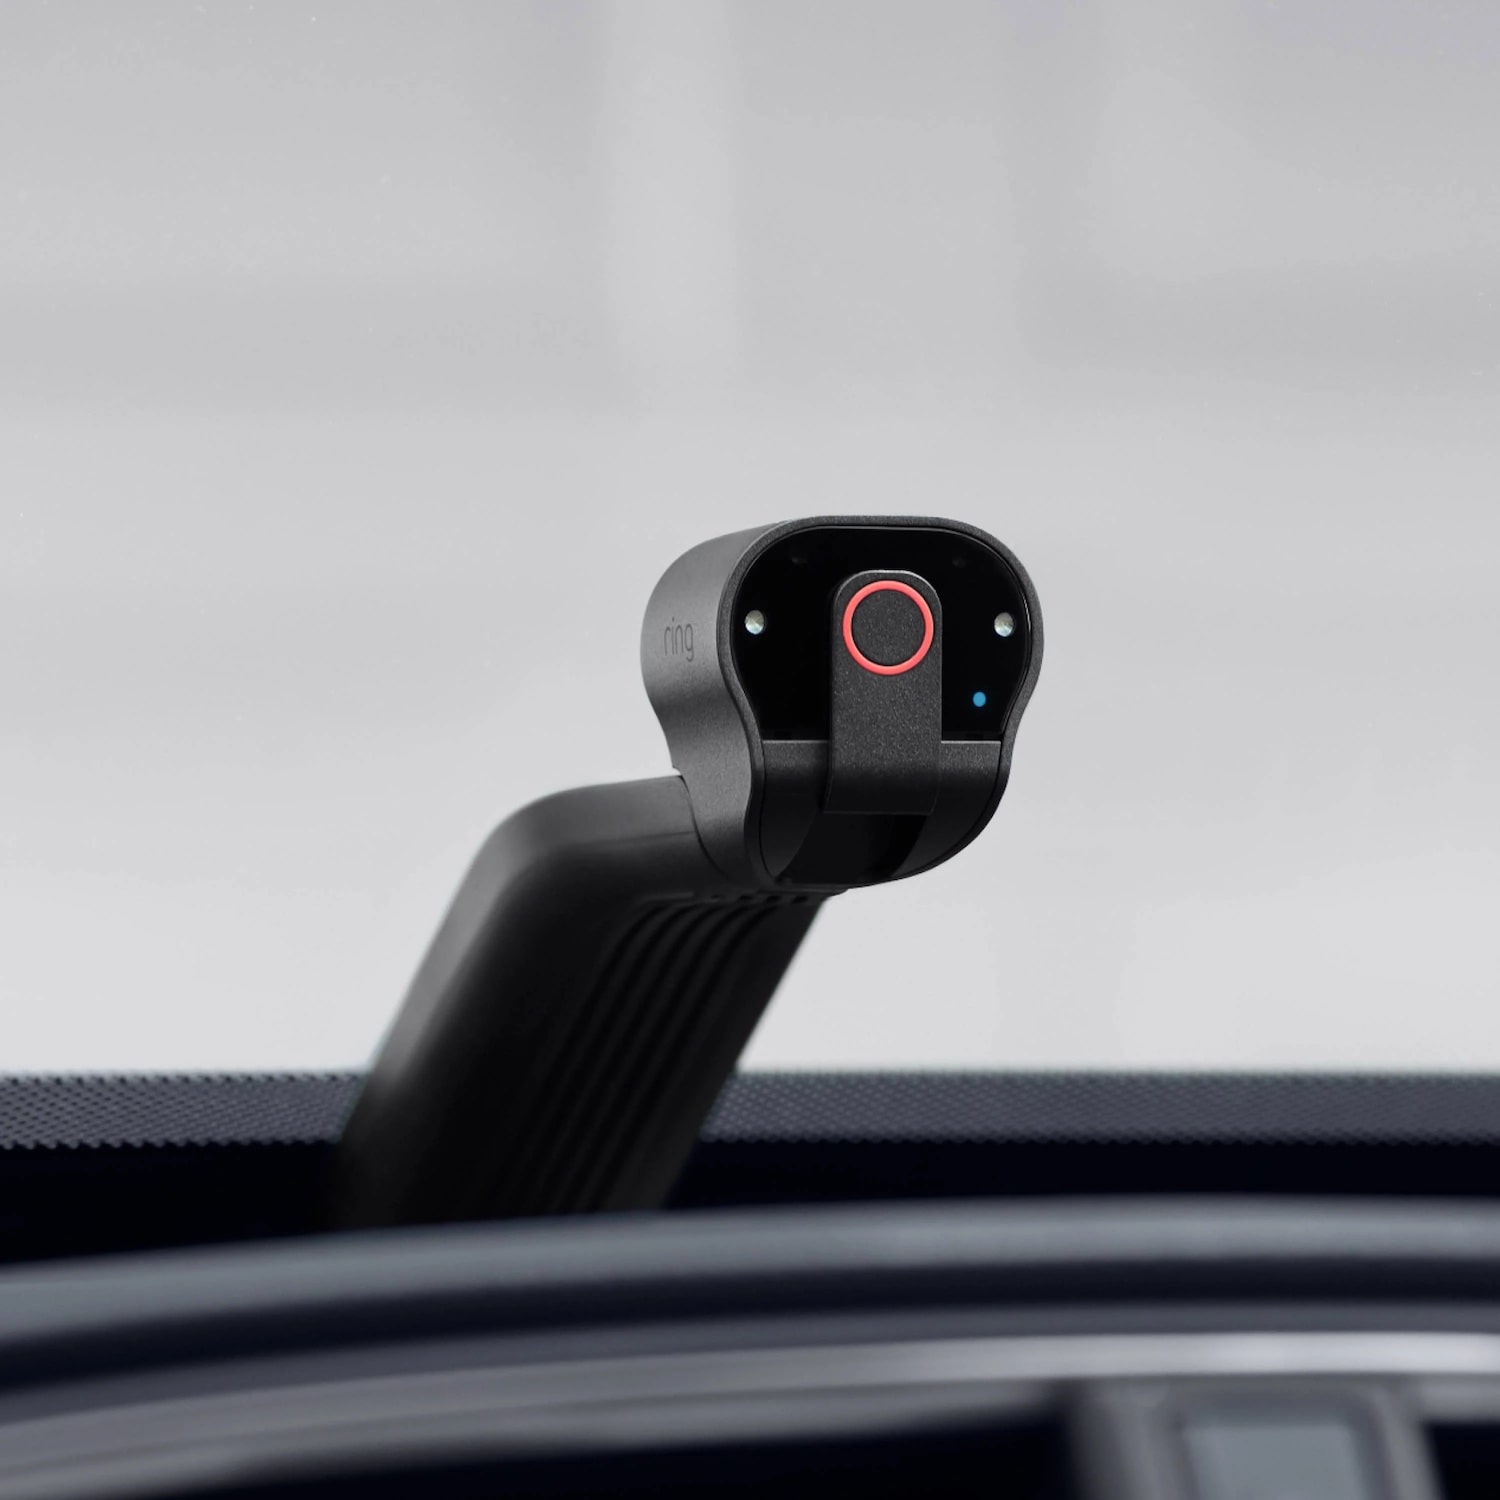 Ring finally debuts its in-car security camera